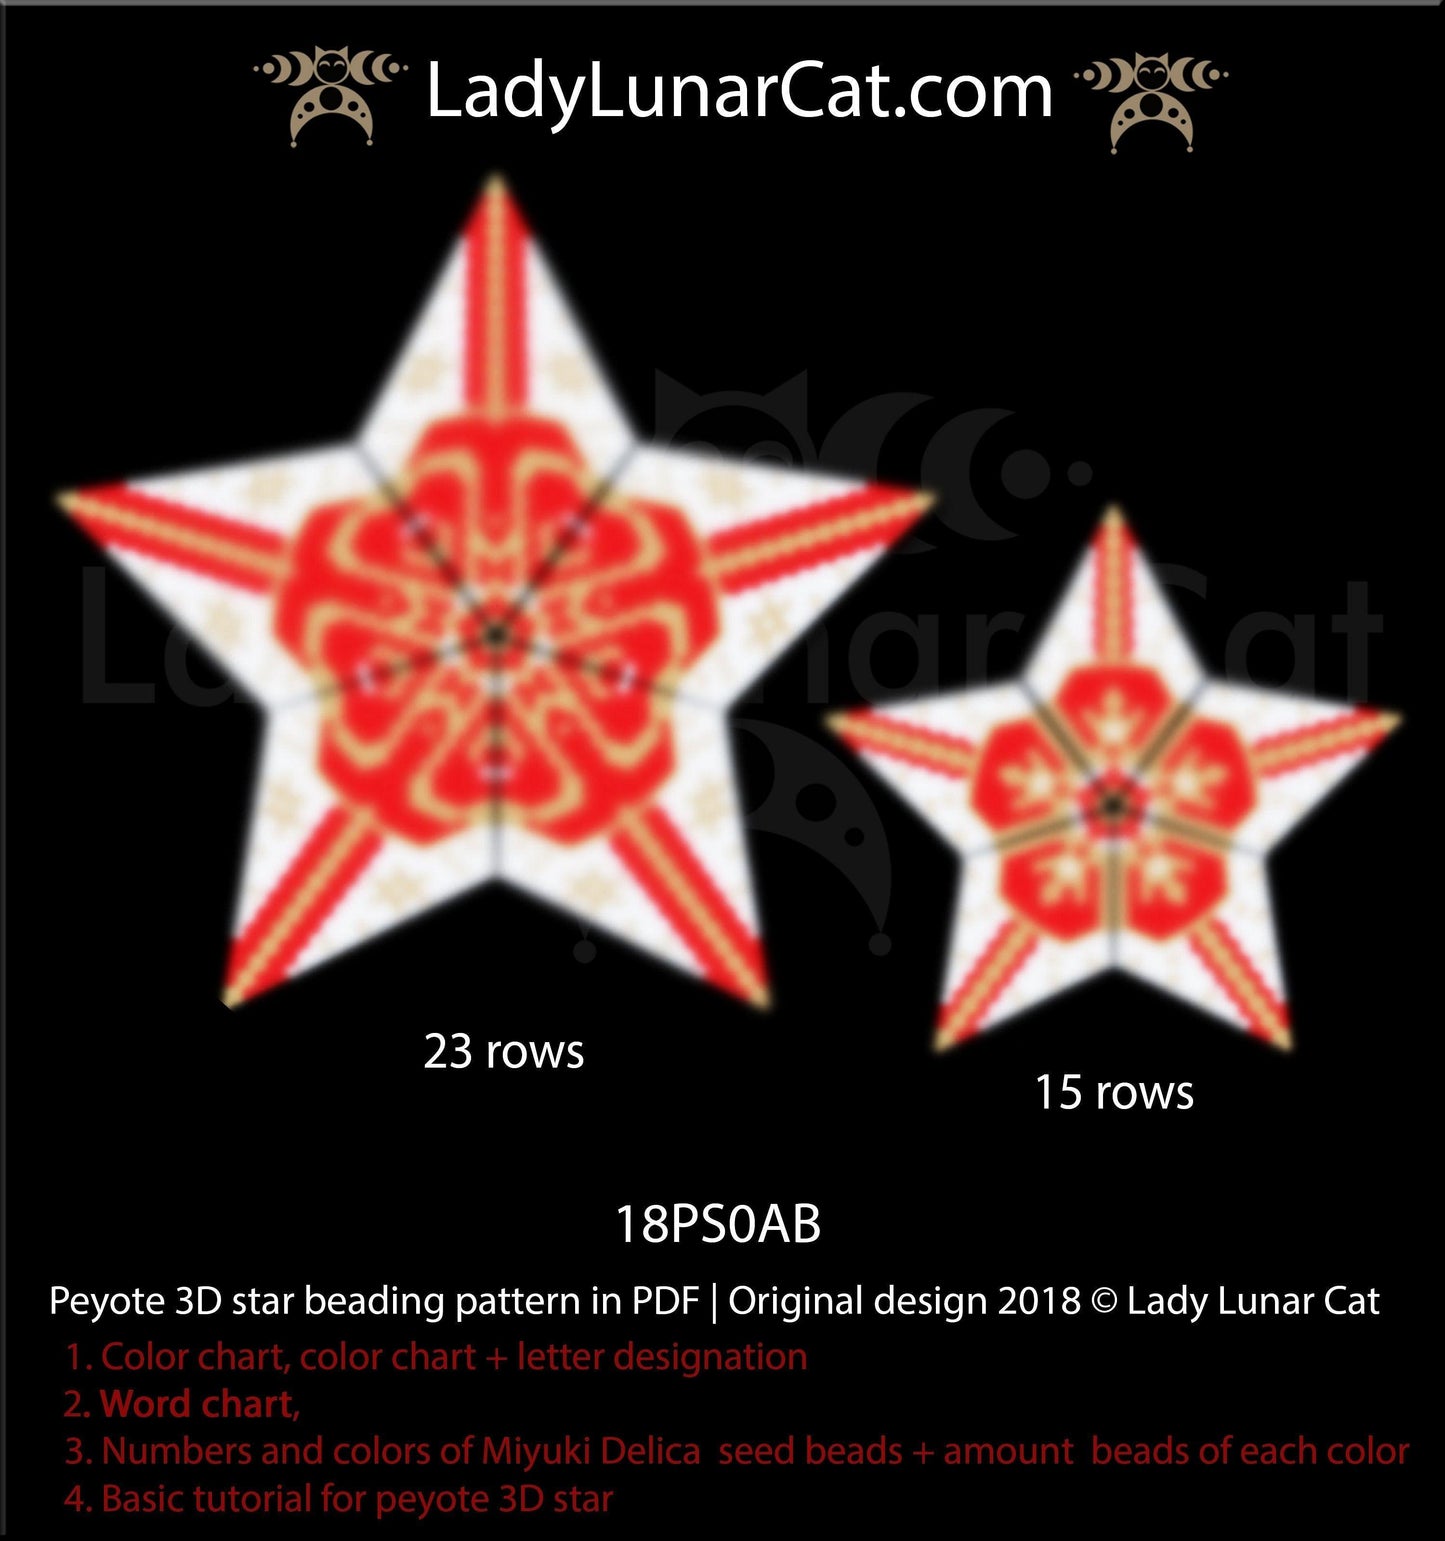 3d peyote star patterns for beading Christmas Winter 18PS043 LadyLunarCat